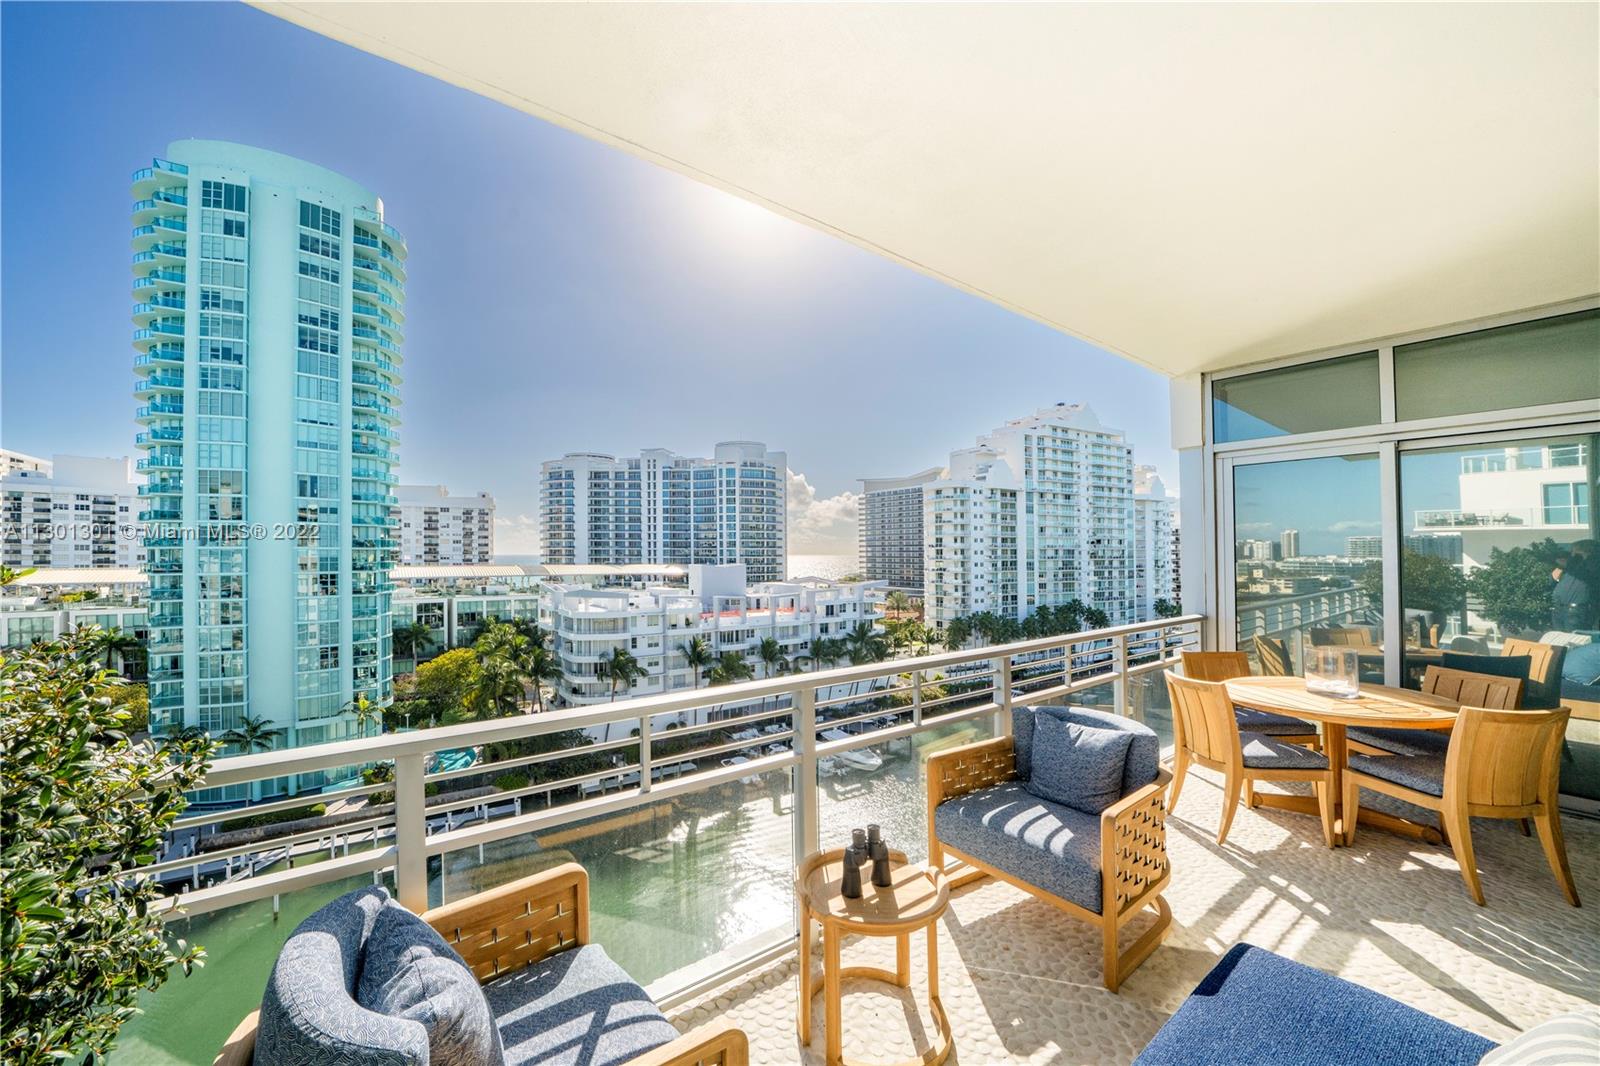 Enjoy island living at its best as you watch the boats go by while having coffee on your generous terrace! Phenomenal ocean, Intracoastal & Miami skyline views await you from this chic, newly renovated corner apartment by celebrated designer & Martha Stewart co-star, Fernando Wong! This 3BD/3.5BA unit offers the finest finishes including wall to wall sisal carpet, Phillip Jeffries wall paper, Italian Marble Master Bath, black-out shades in master & lighting by Kelly Wearstler, Suzanne Kassler & Ralph Lauren. Brand new kitchen includes Miele double oven/dishwasher/stovetop/exhaust, Sub Zero refrigerator, Electrolux washer/dryer & new AC/electrical panel. Resort like amenities at this 24hr gated/family friendly community include: 2 parking, valet/doorman, security, 2 pools, spa, gym, & more!